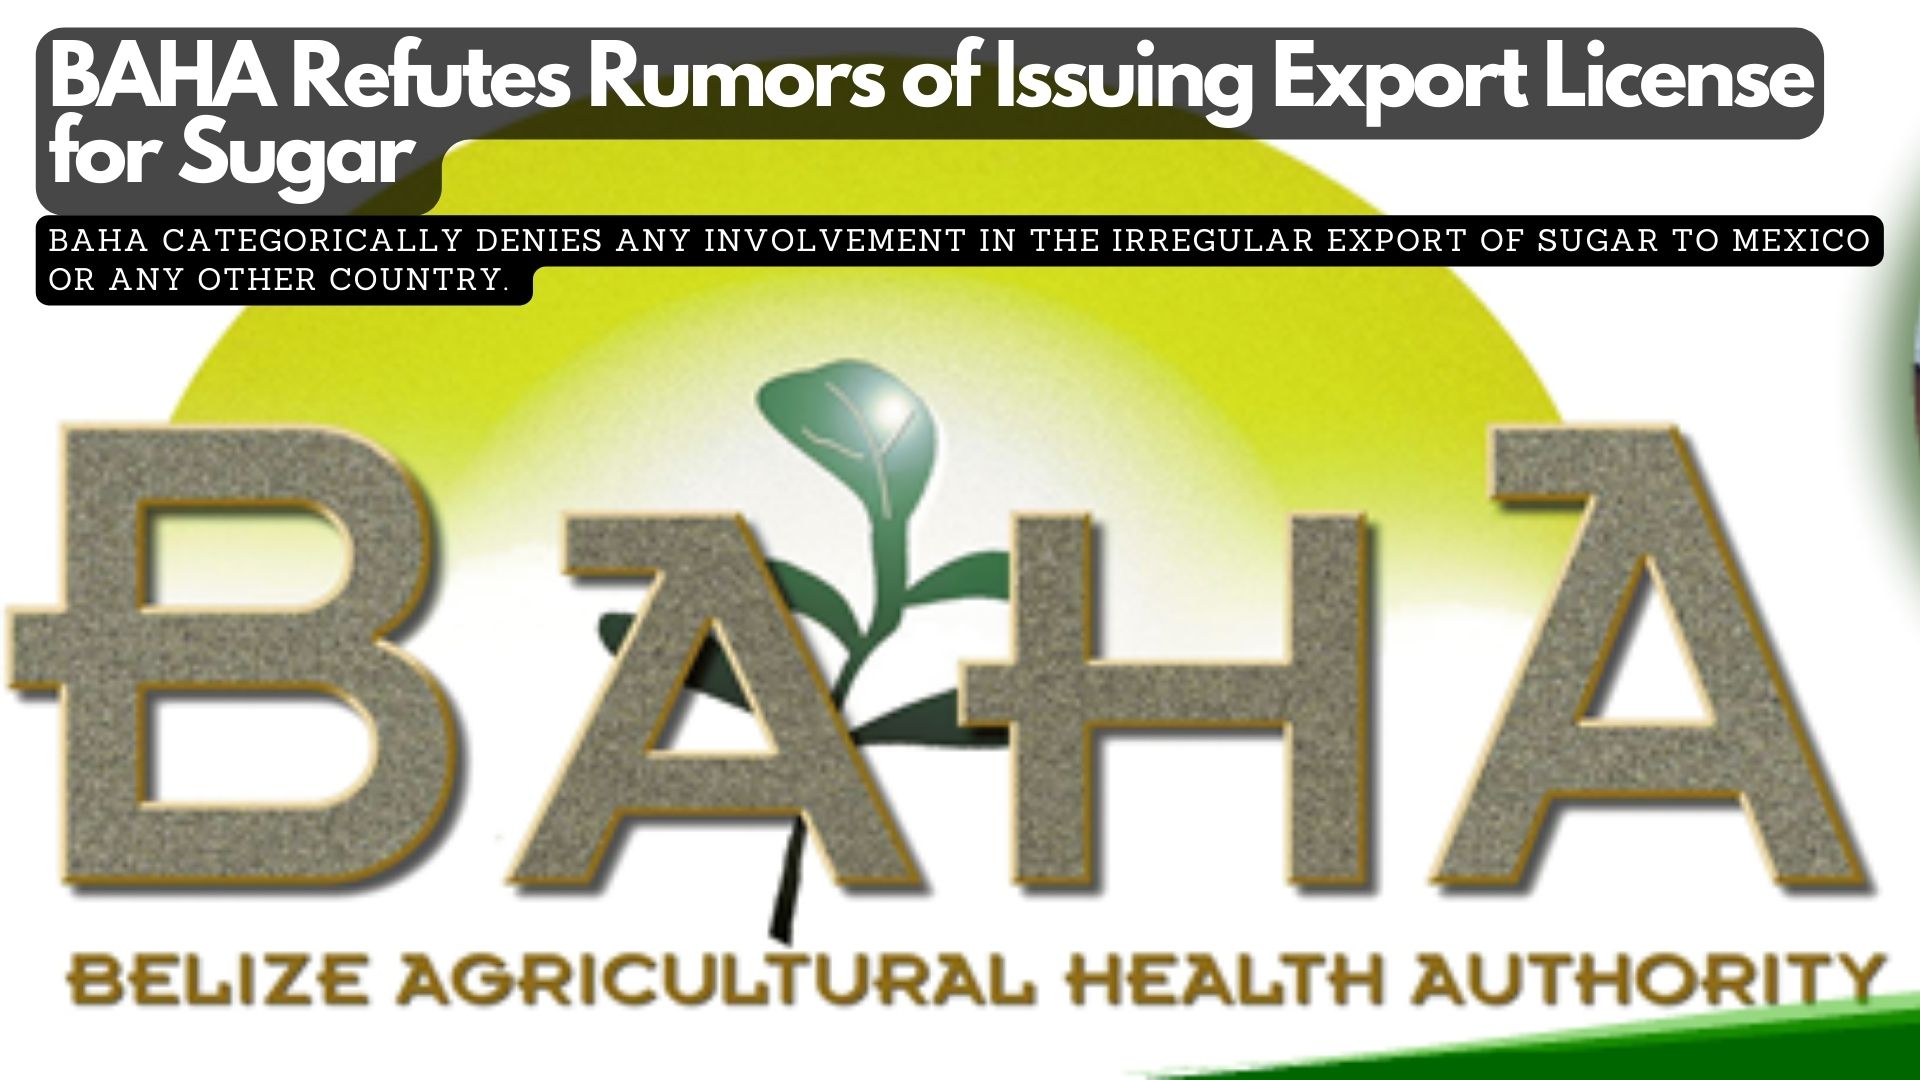 BAHA Refutes Rumors of Issuing Export License for Sugar